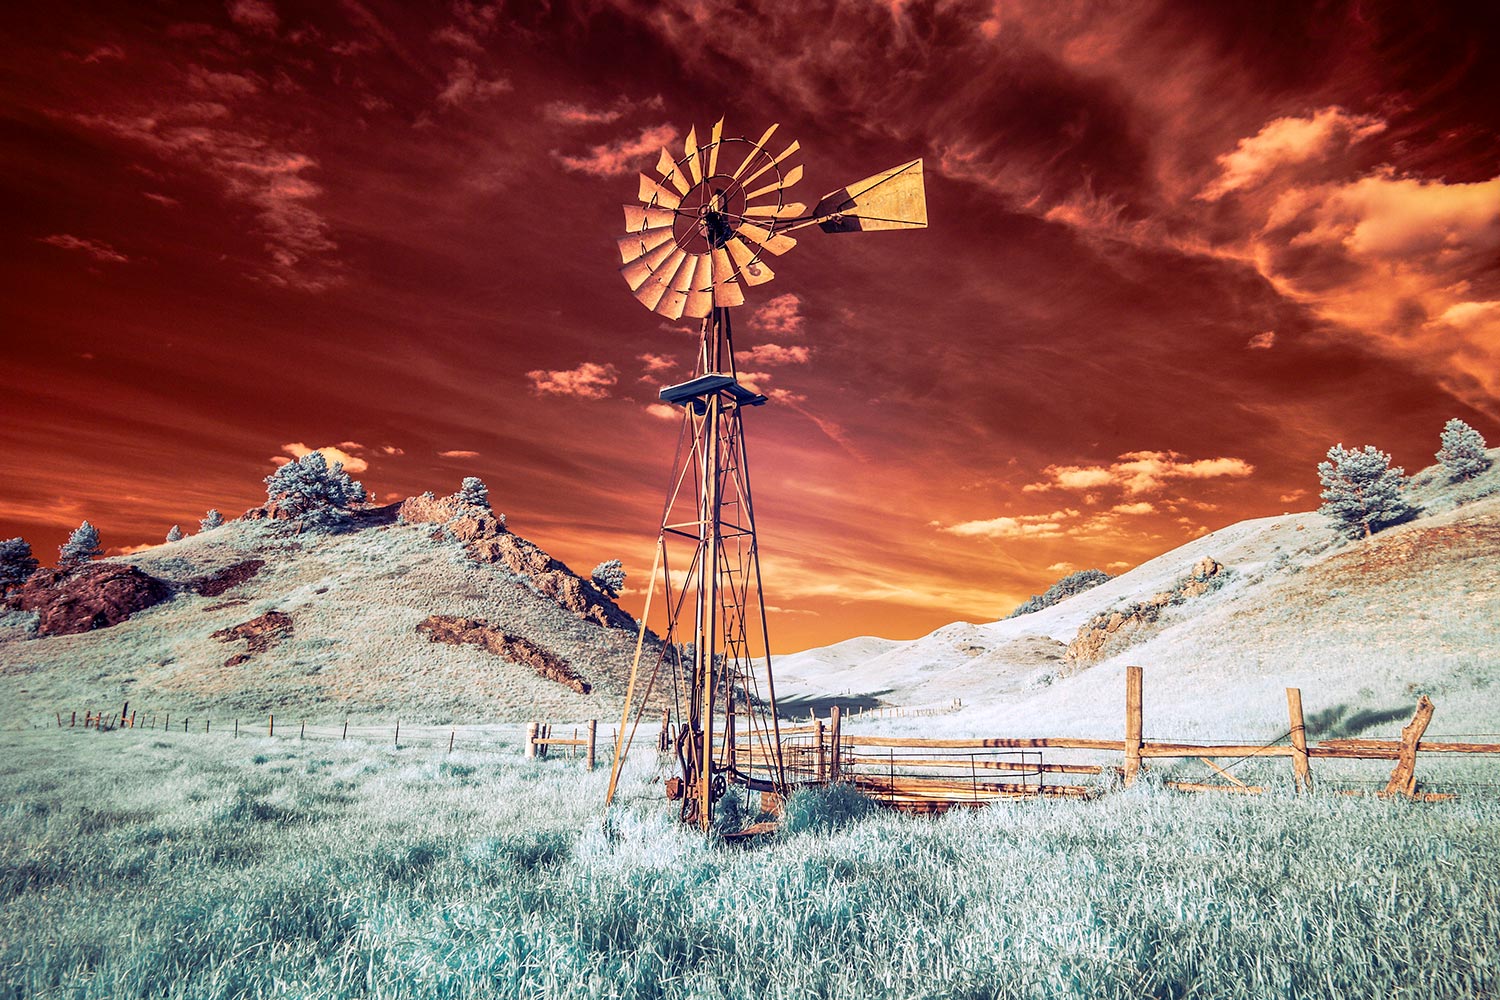 An infrared photo of a beautiful old windmill (a.k.a. windpump) on a ranch in the Bear Paw Mountains near Havre, Montana.&nbsp;→ Buy a Print&nbsp;or License Photo